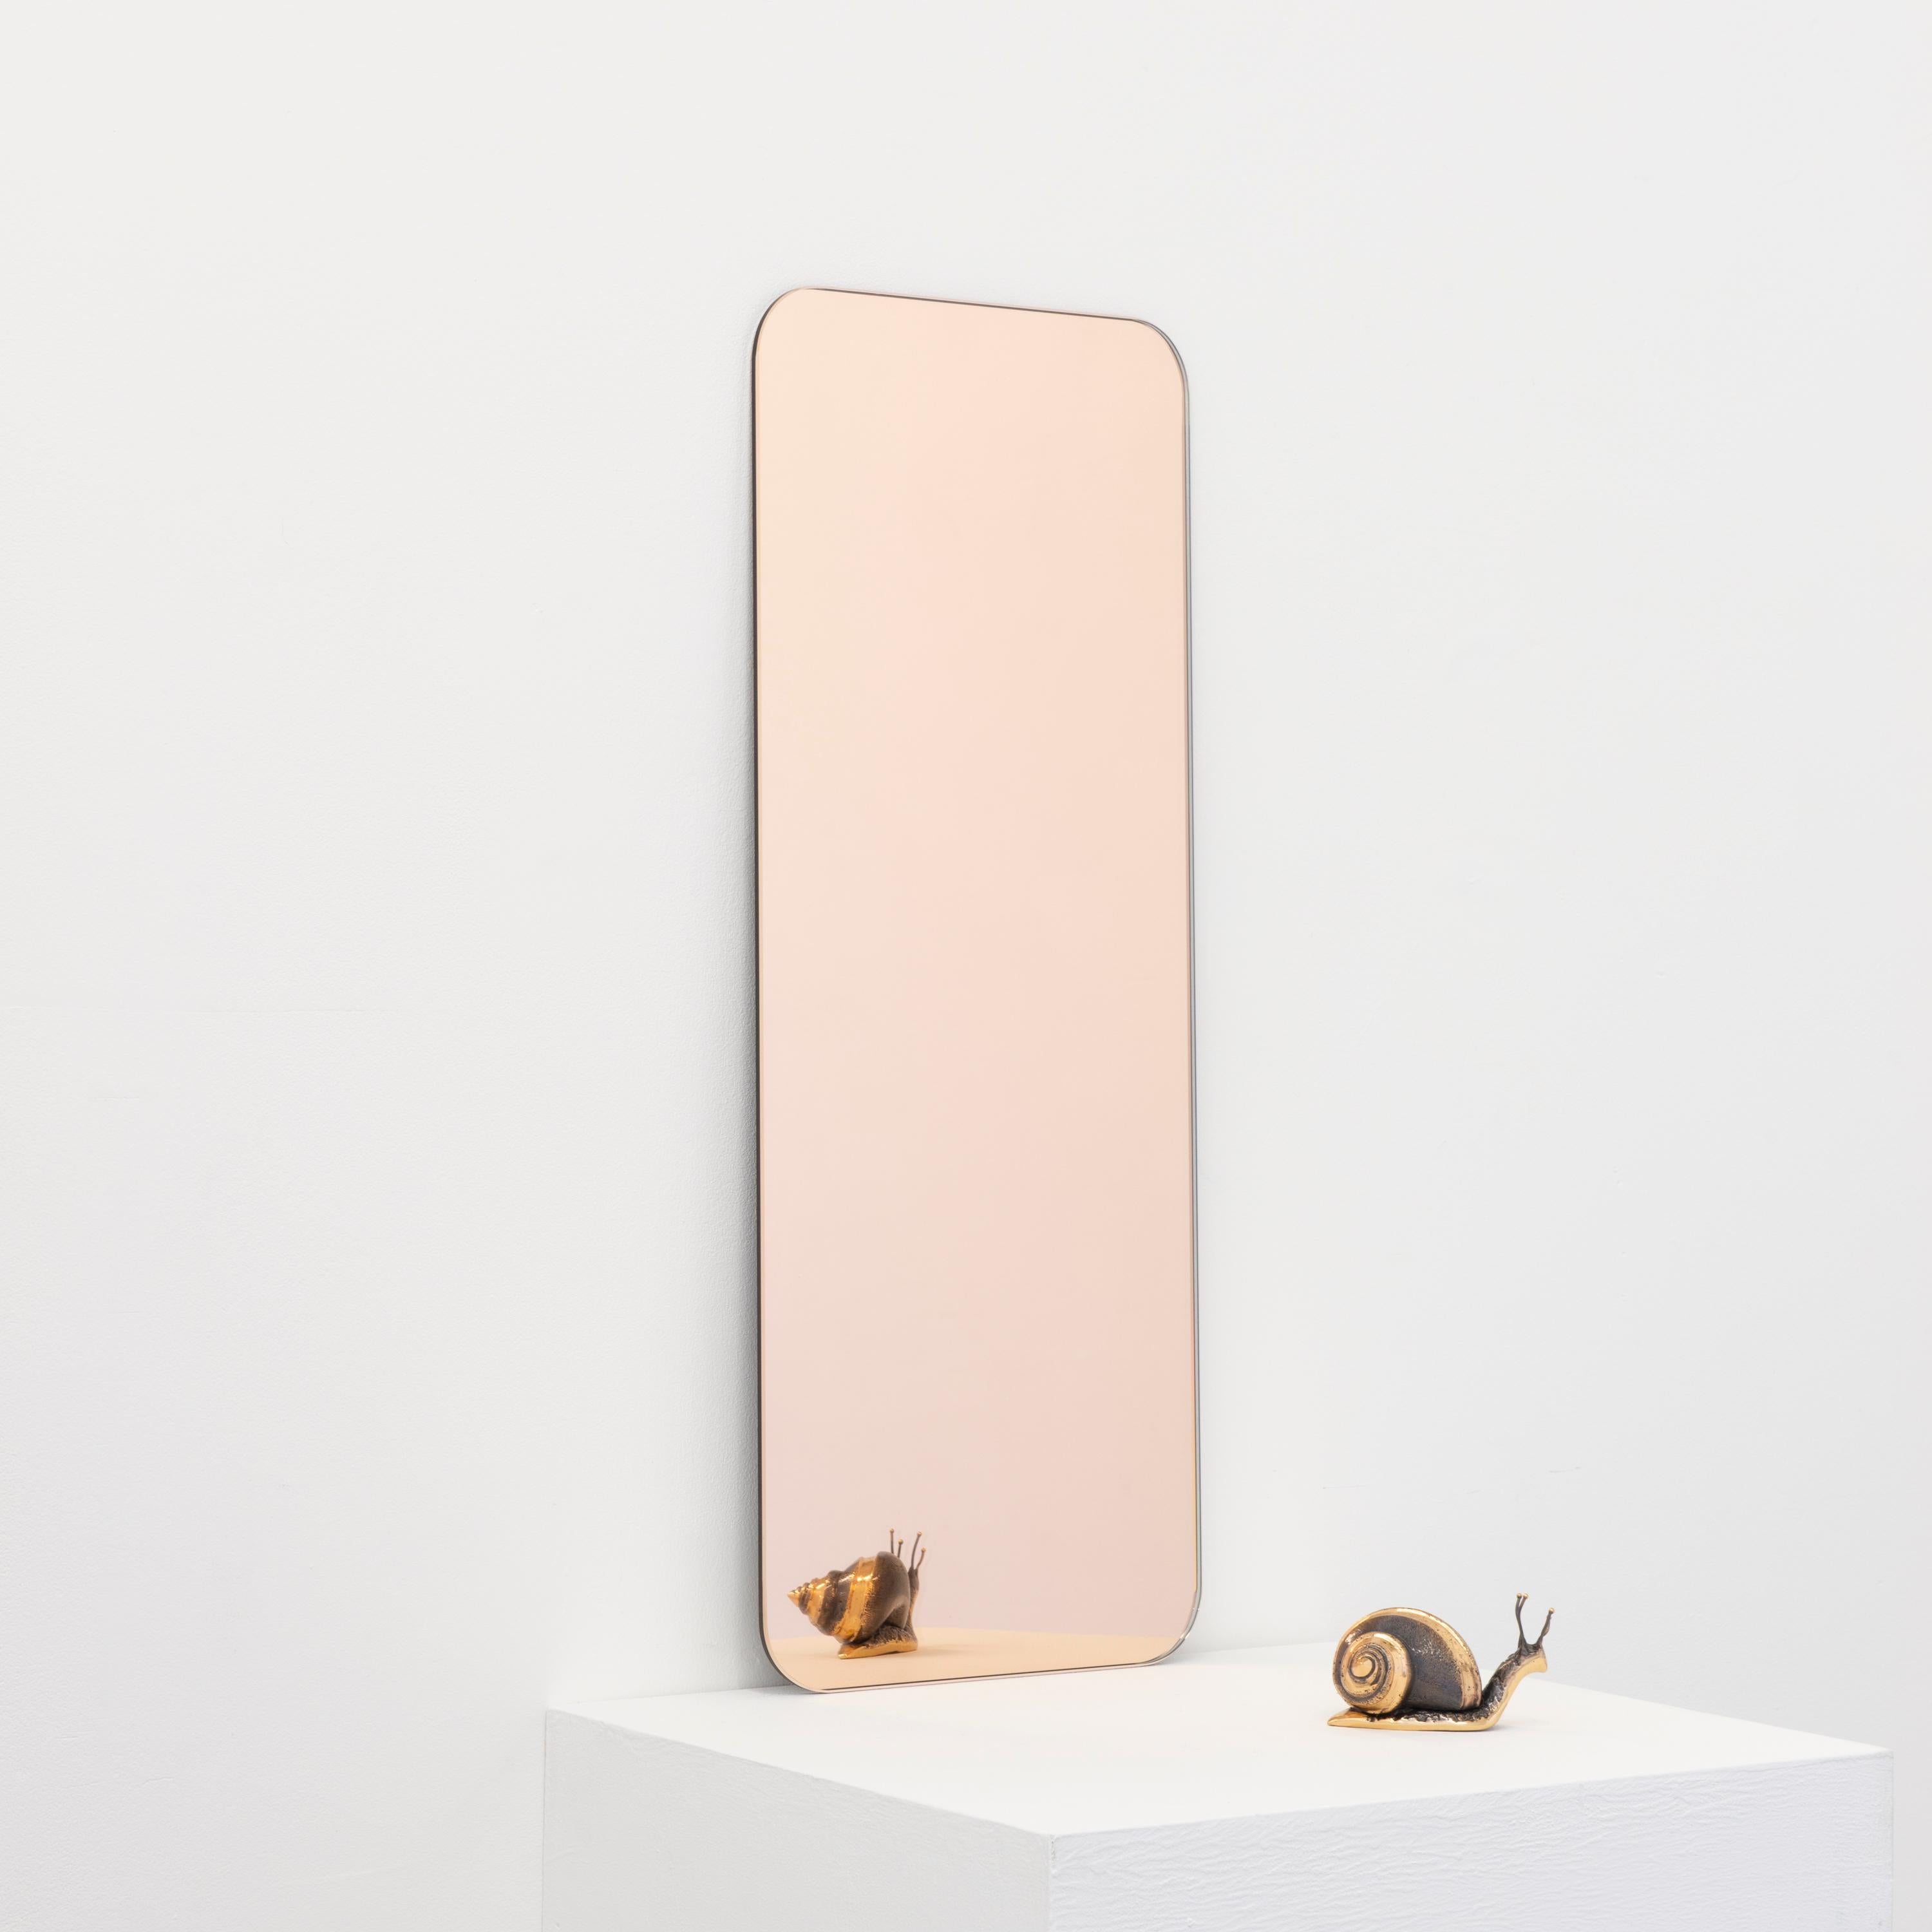 Minimalist rectangular shaped frameless rose gold tinted mirror with a floating effect. Quality design that ensures the mirror sits perfectly parallel to the wall. Designed and made in London, UK.

Fitted with professional plates not visible once